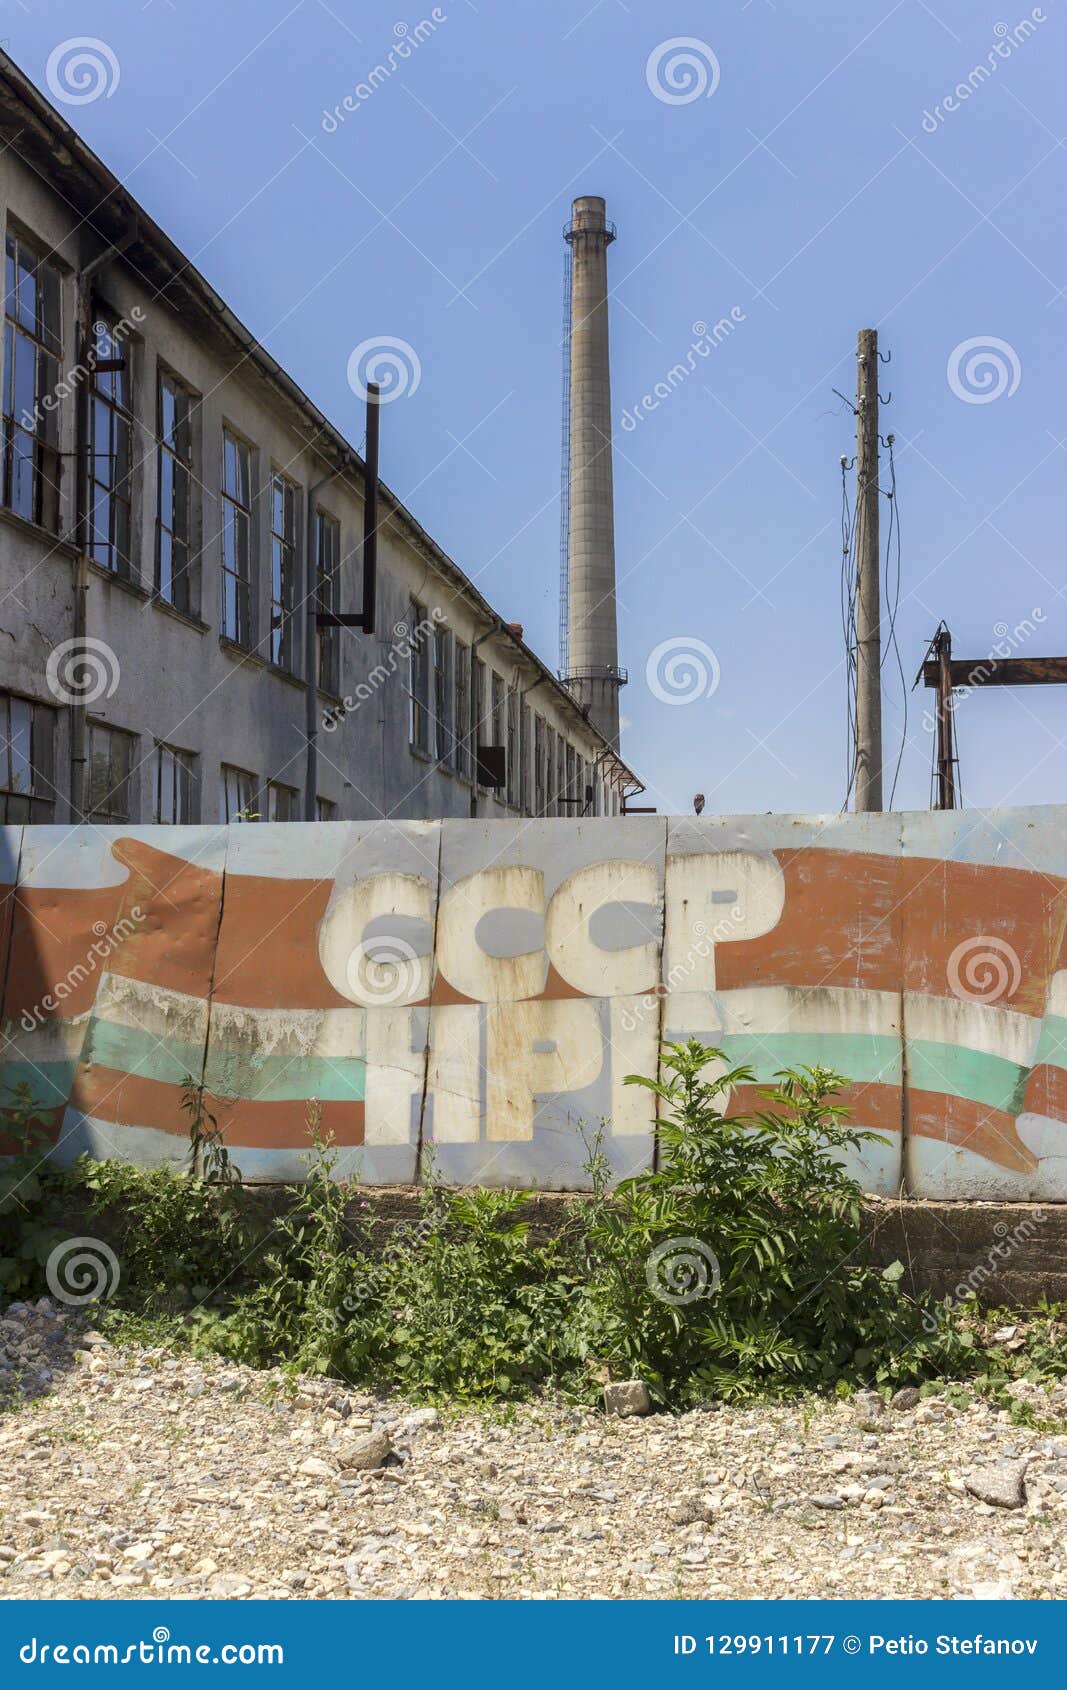 a fence of a factory from the time of communism